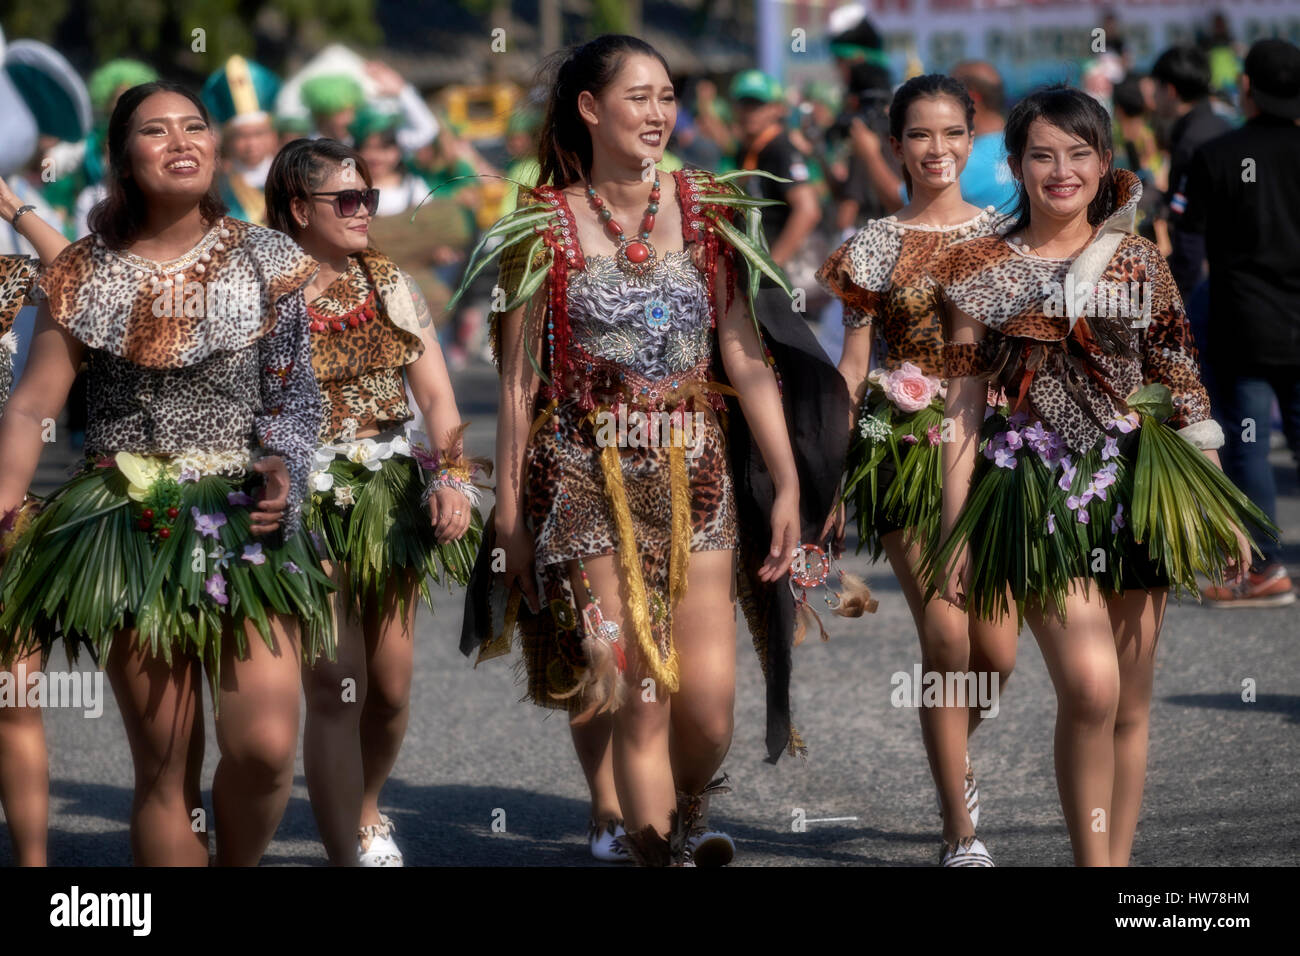 St. Patrick's Day Thailand and Thai females dressed in green grass skirts for the street parade. Woman grass skirt Stock Photo